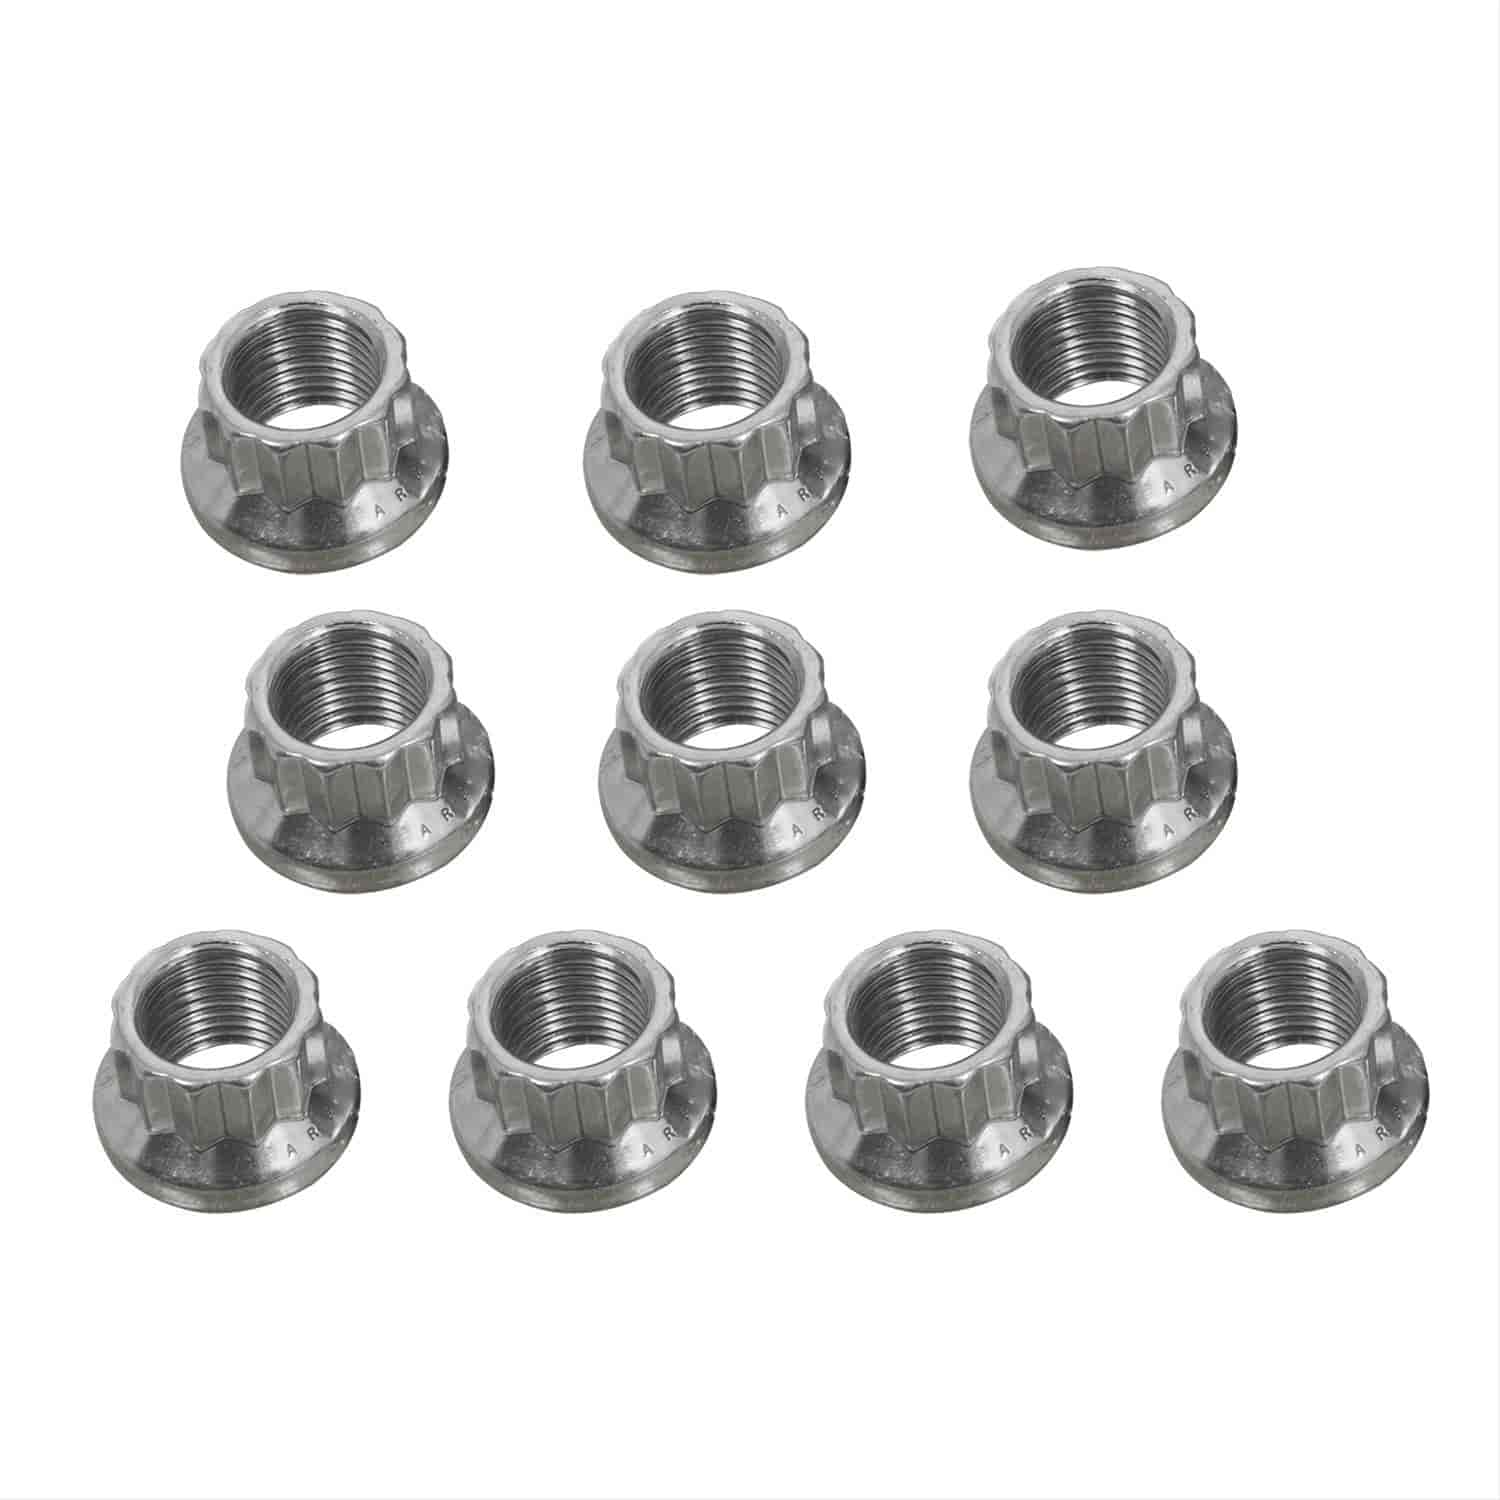 Stainless Steel 12-Point Nut 1/2"-20